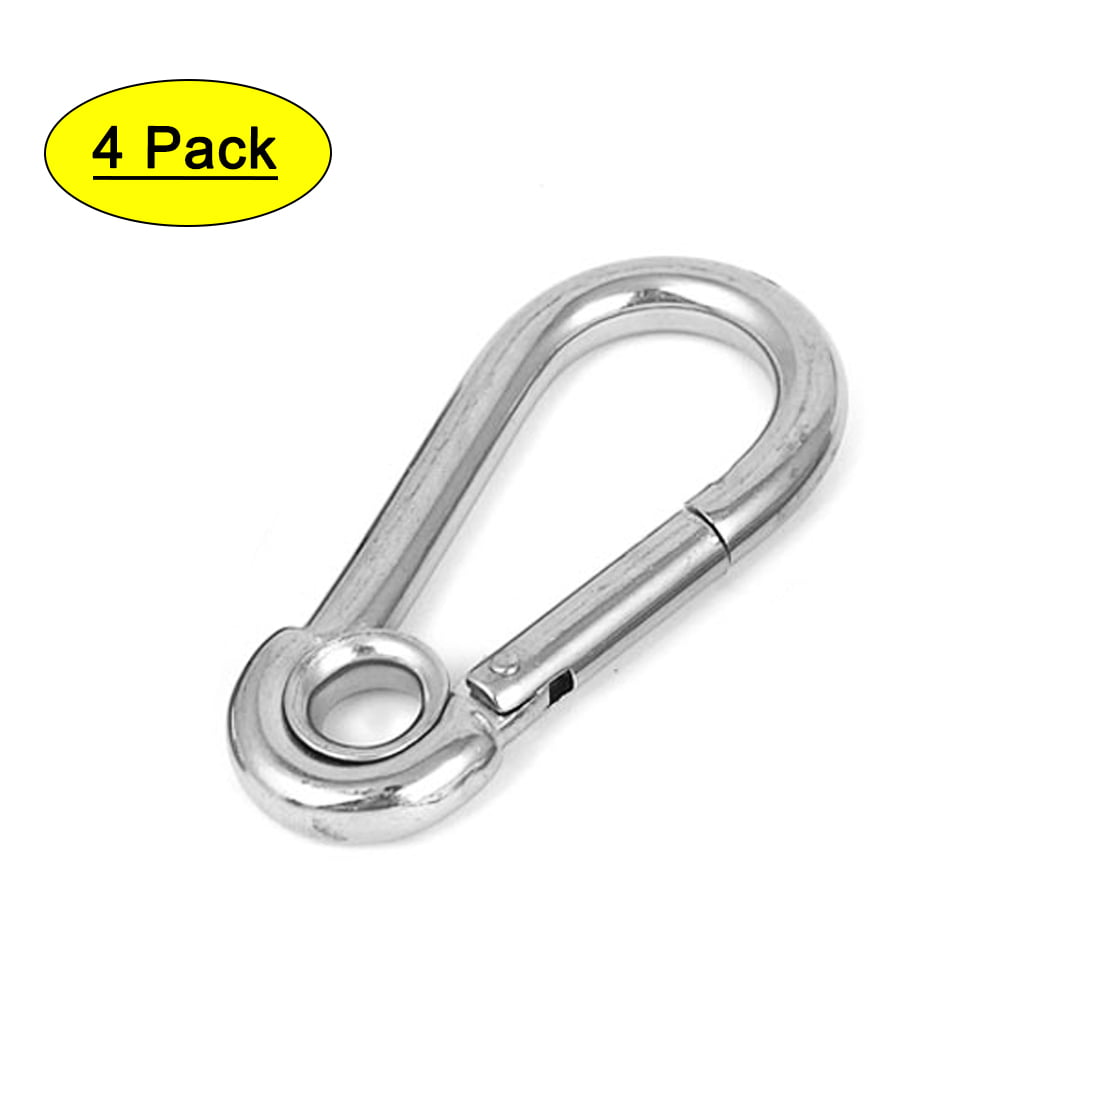 4Pcs Outdoor Stainless Steel Carabiner Camp Spring Snap Clip Hook Keychain 